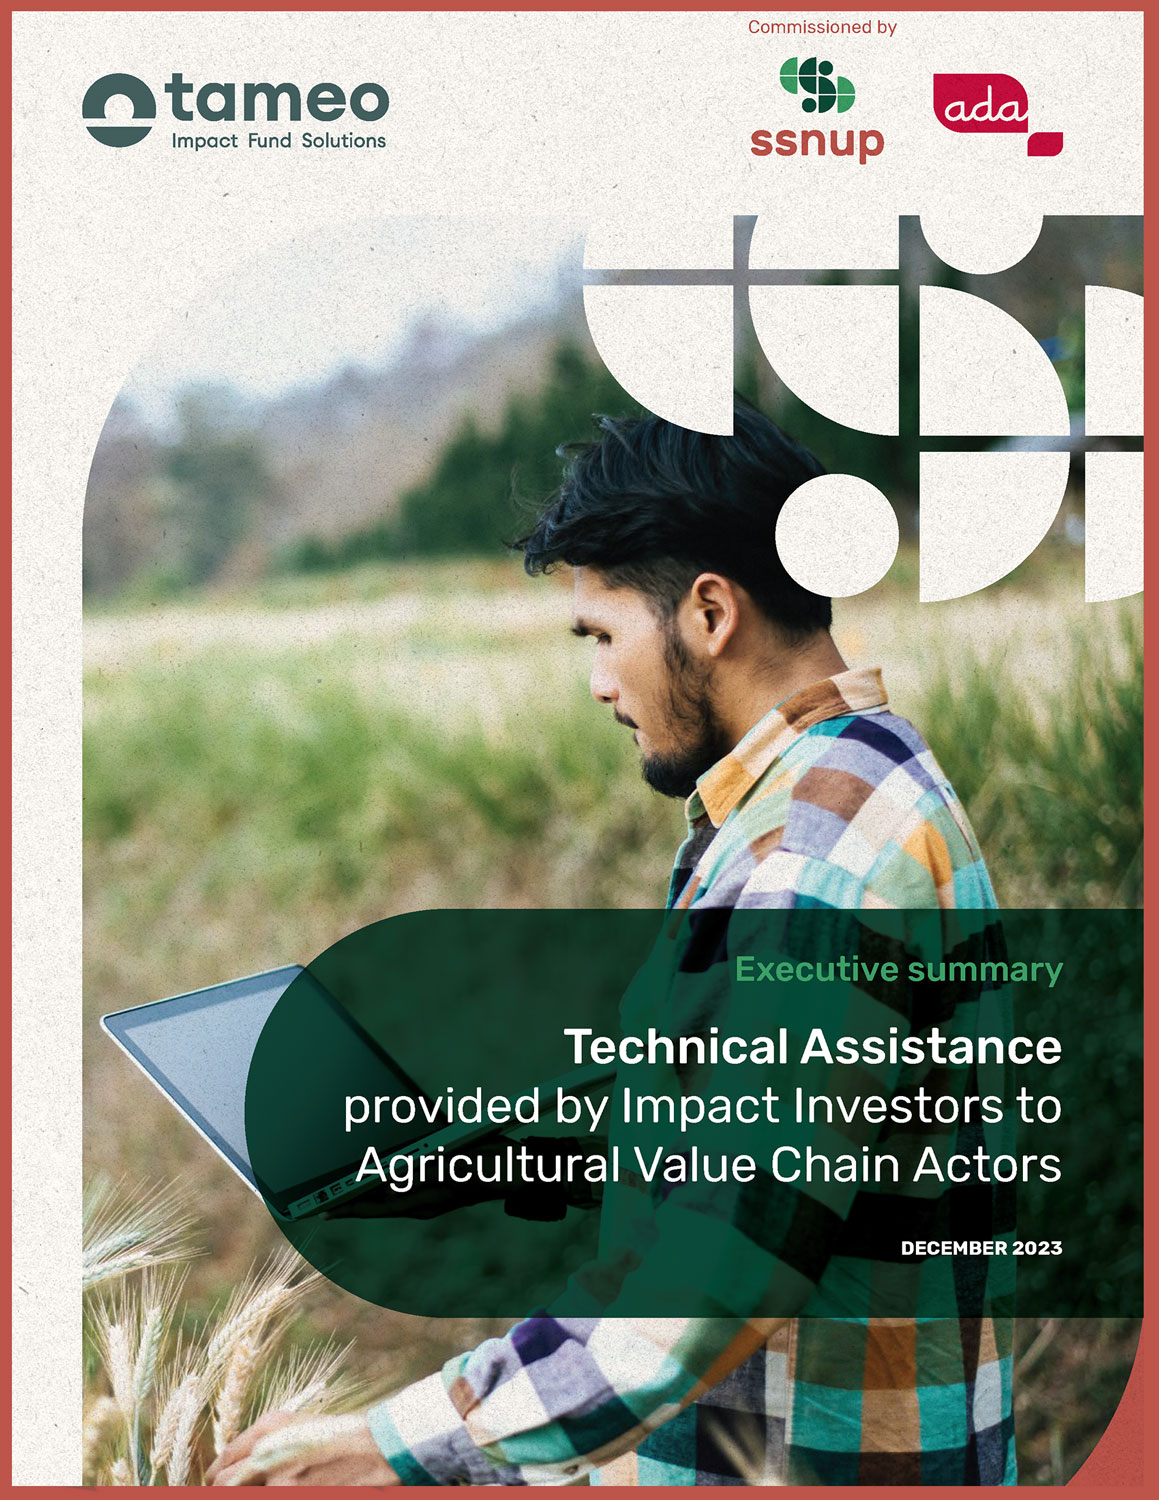 Executive summary - Technical assistance provided by impact investors to agricultural value chain actors